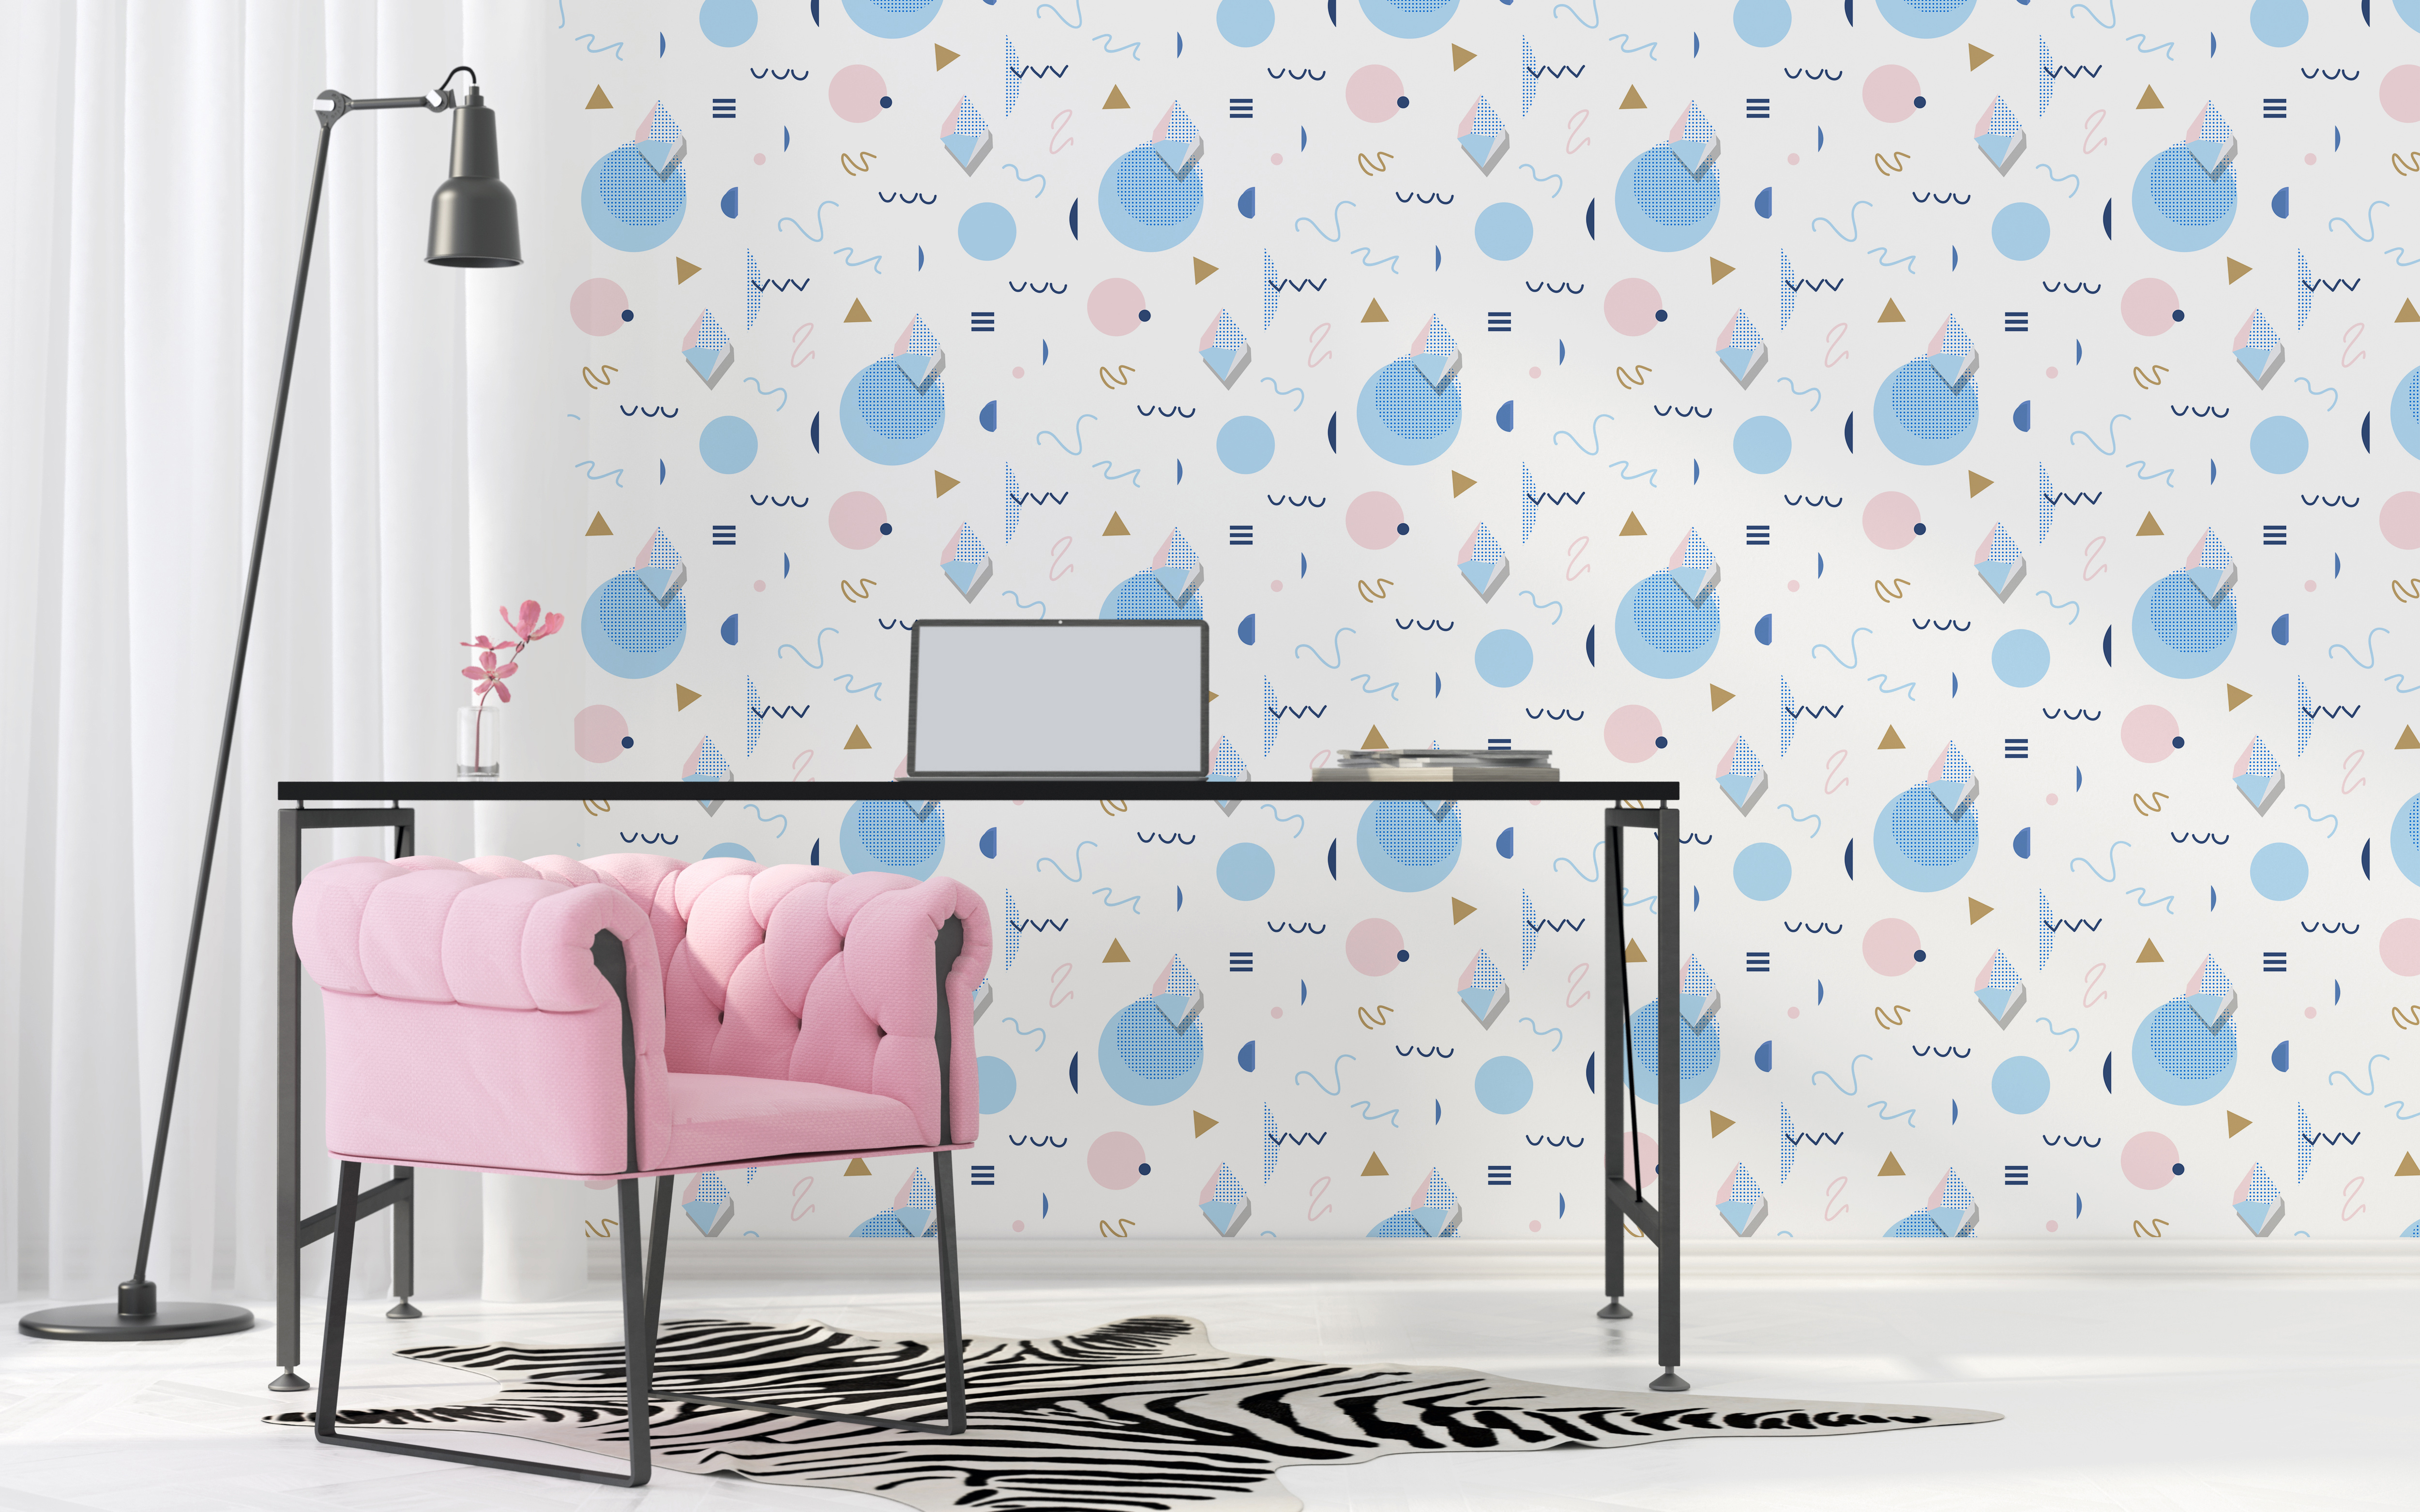 Patterned rain • Contemporary - Office - Abstraction - Wall Murals